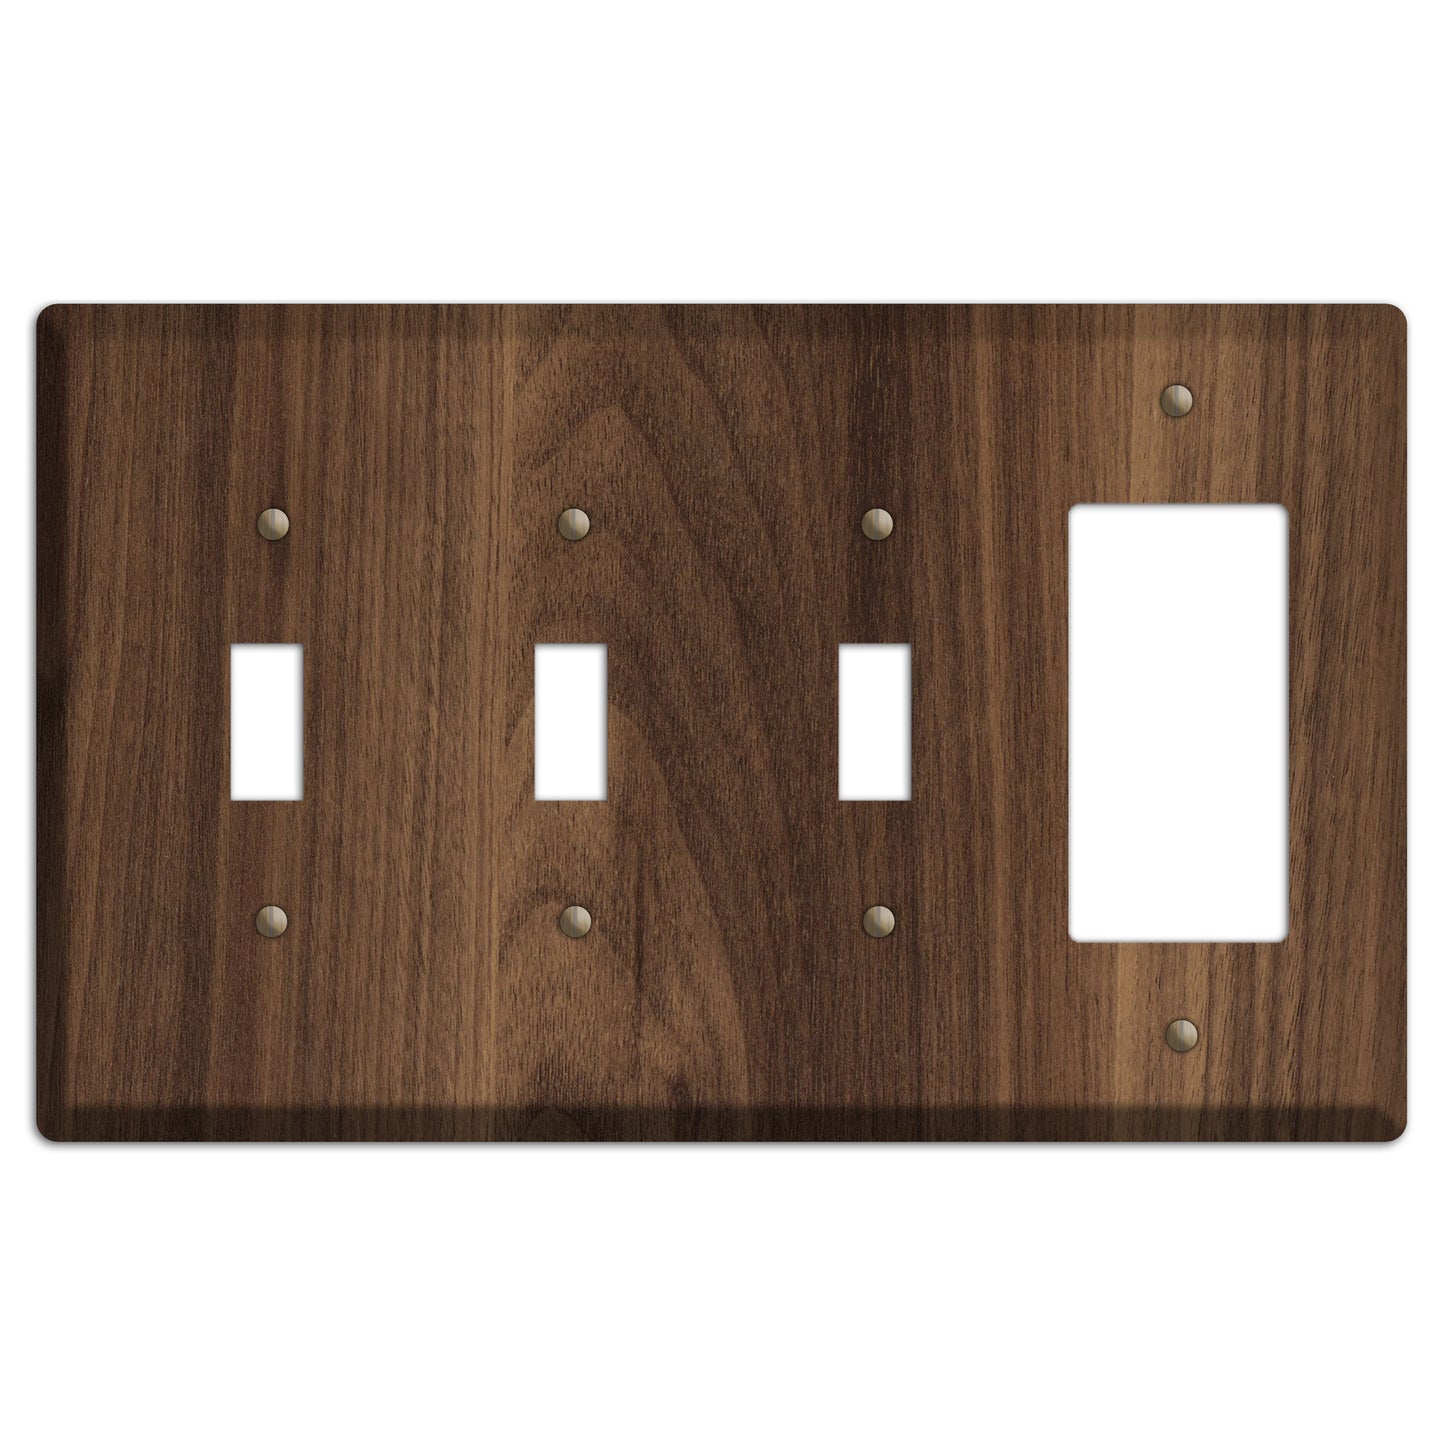 Walnut Wood 3 Toggle / Rocker Outlet Cover Plate